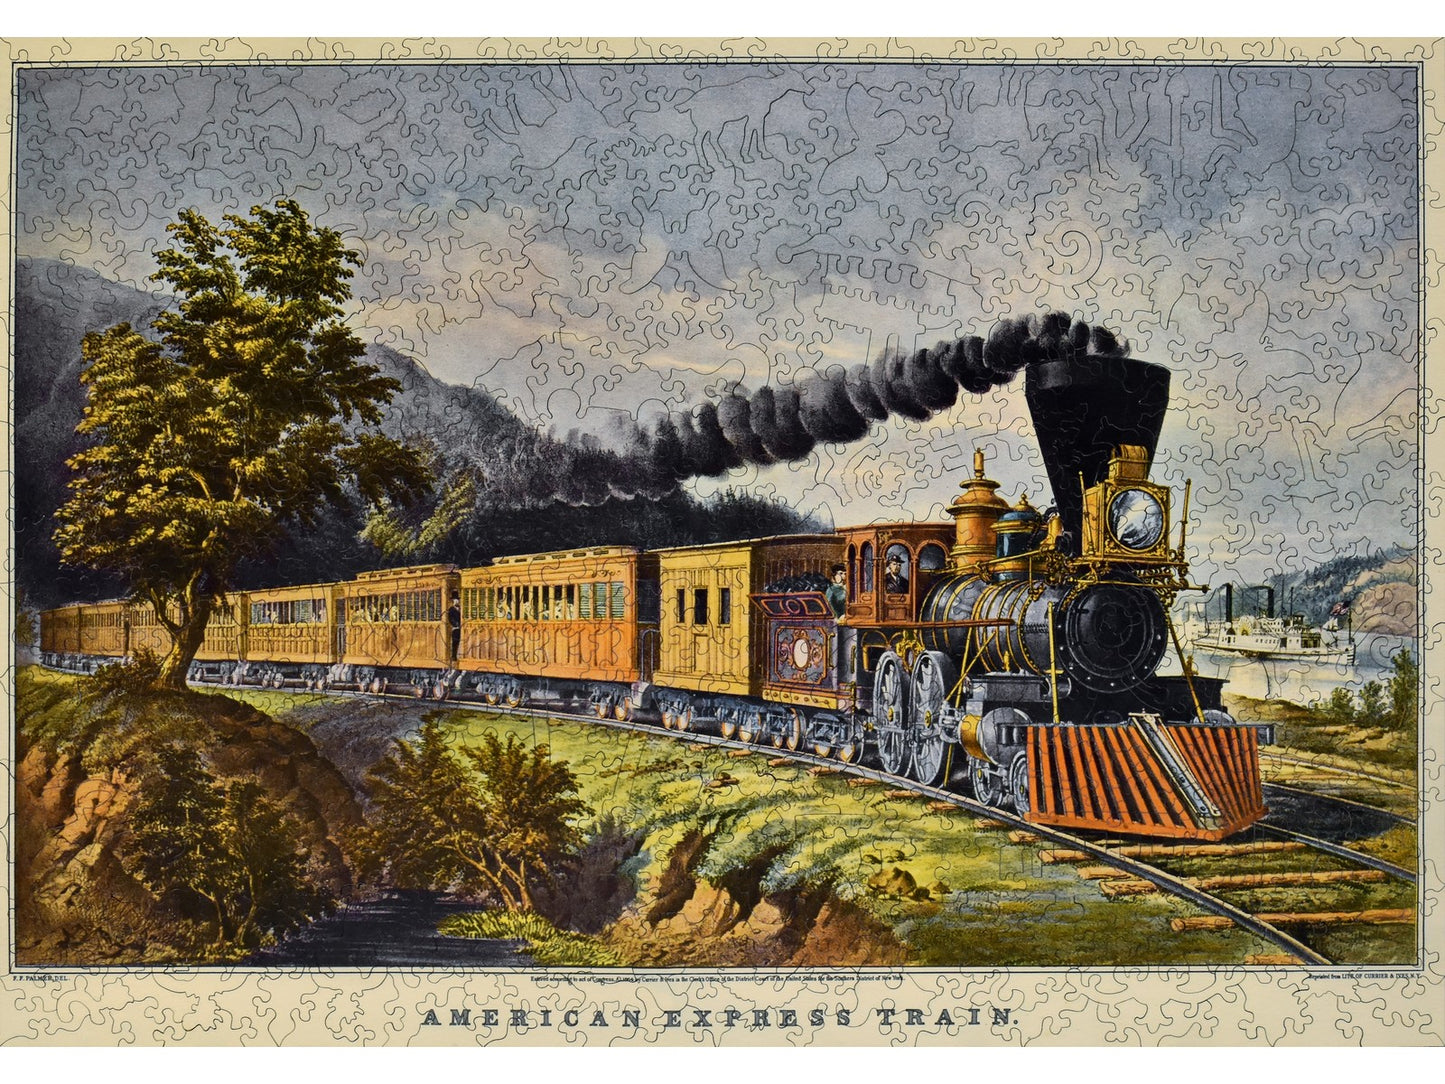 The front of the puzzle, American Express Train, which shows an old train traveling down tracks.